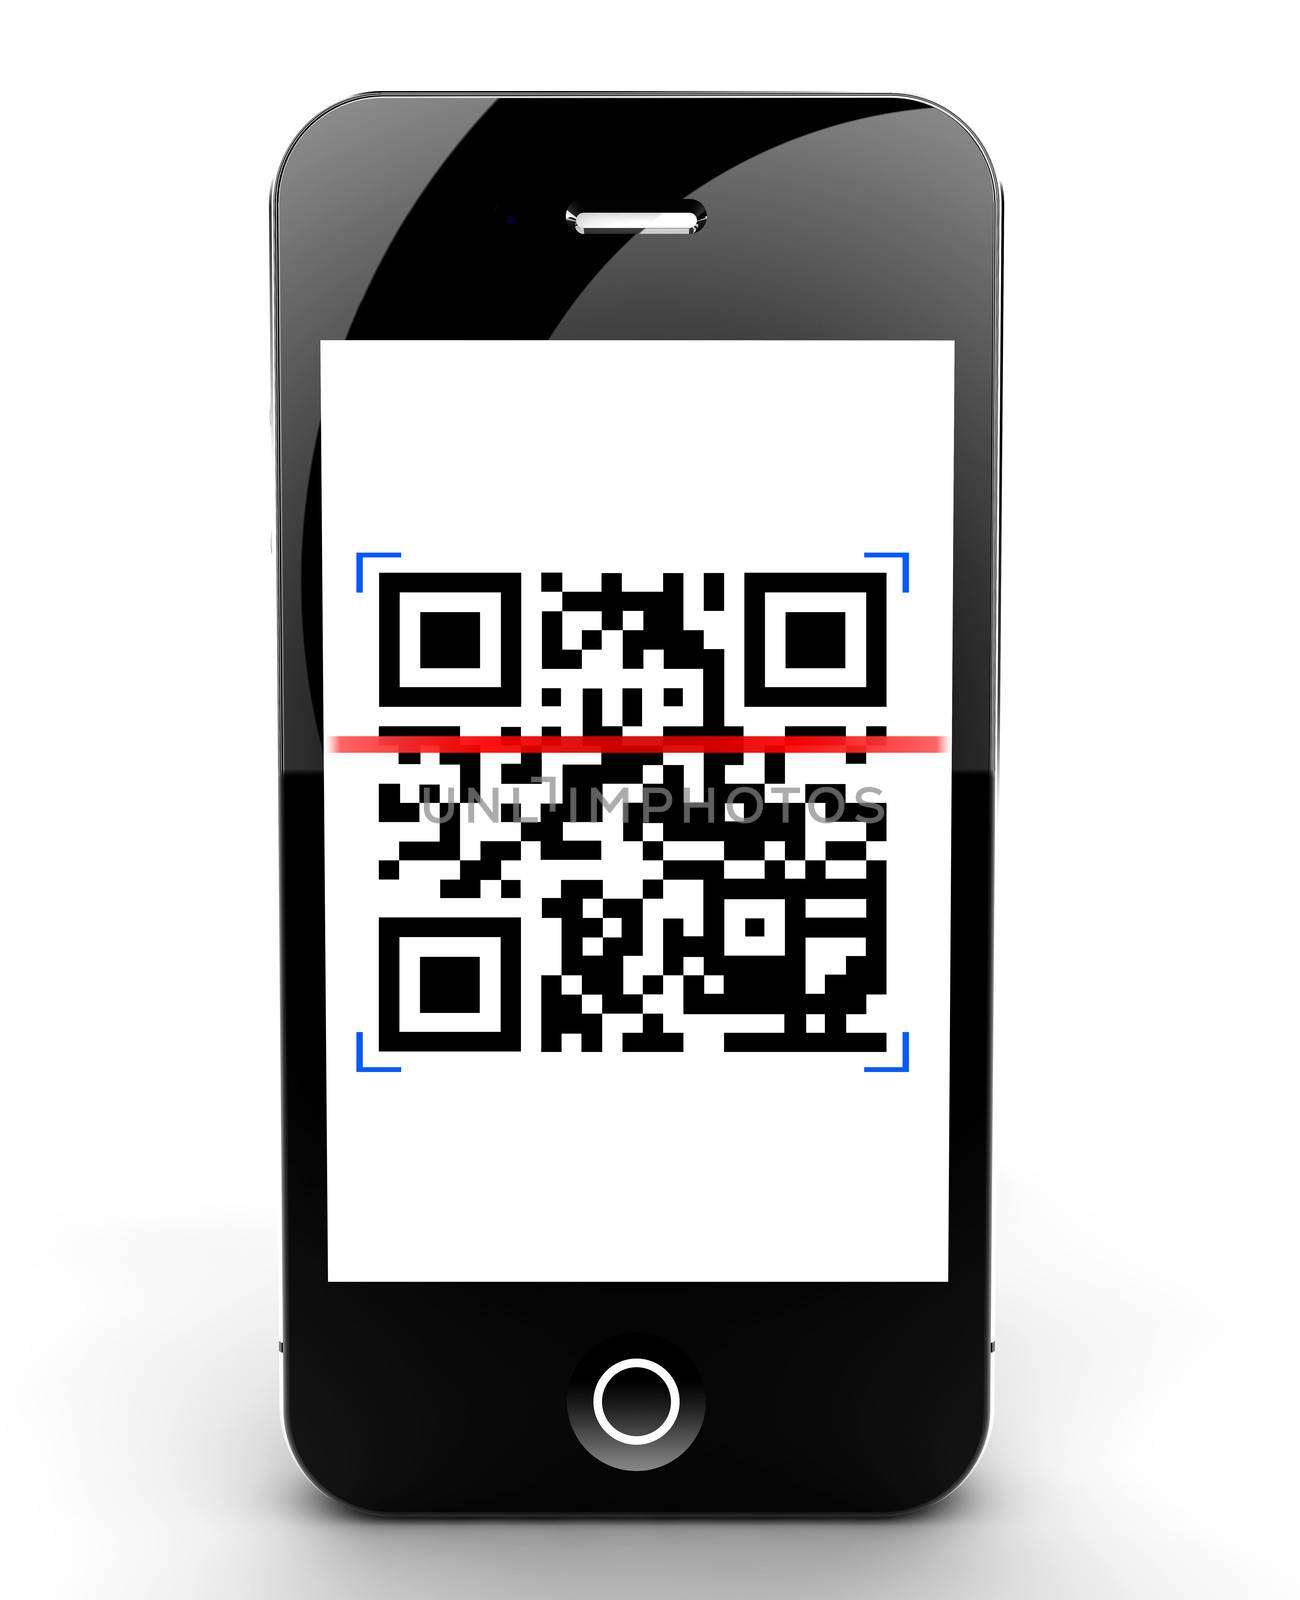 Smartphone scanning code by cla78